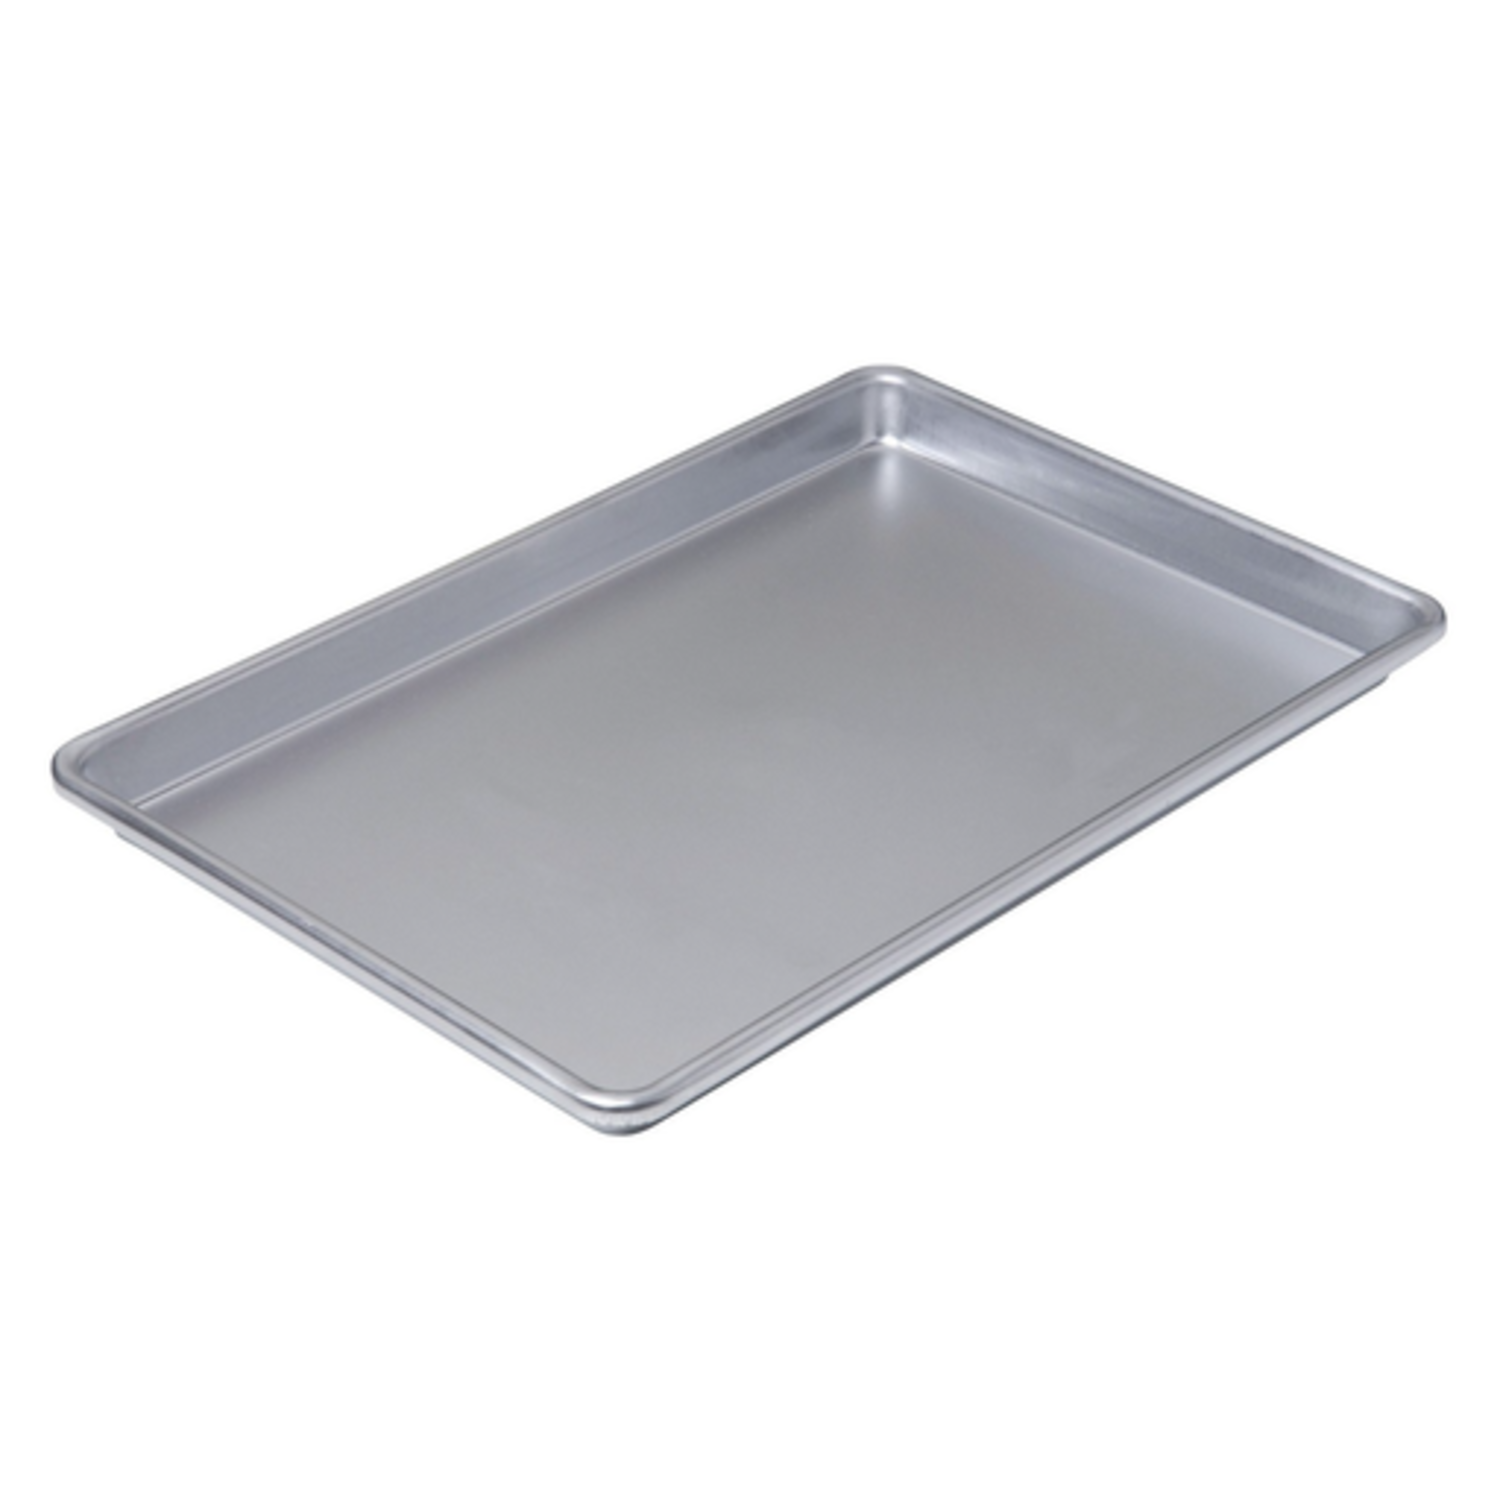 Nordic Ware Naturals Jelly Roll Pan 15 x 10